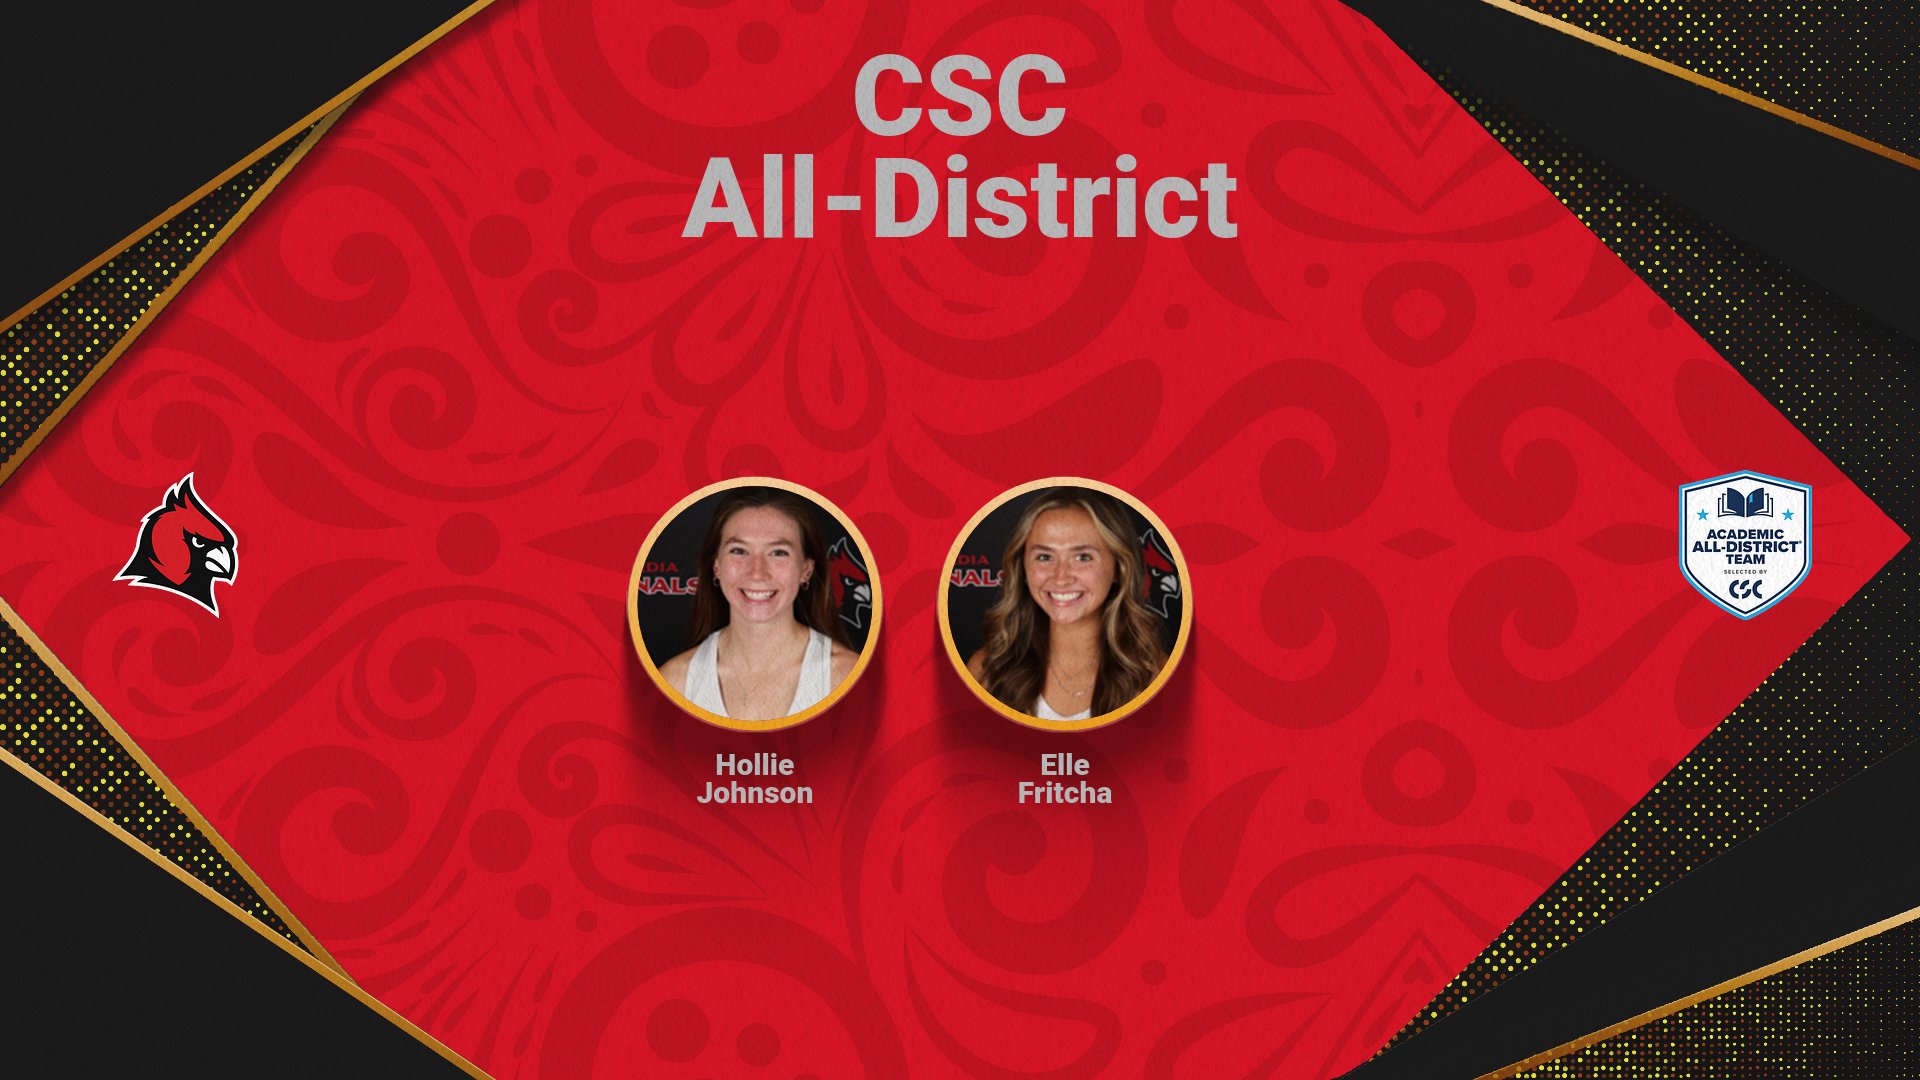 Fritcha and Johnson named to CSC Academic All-District team